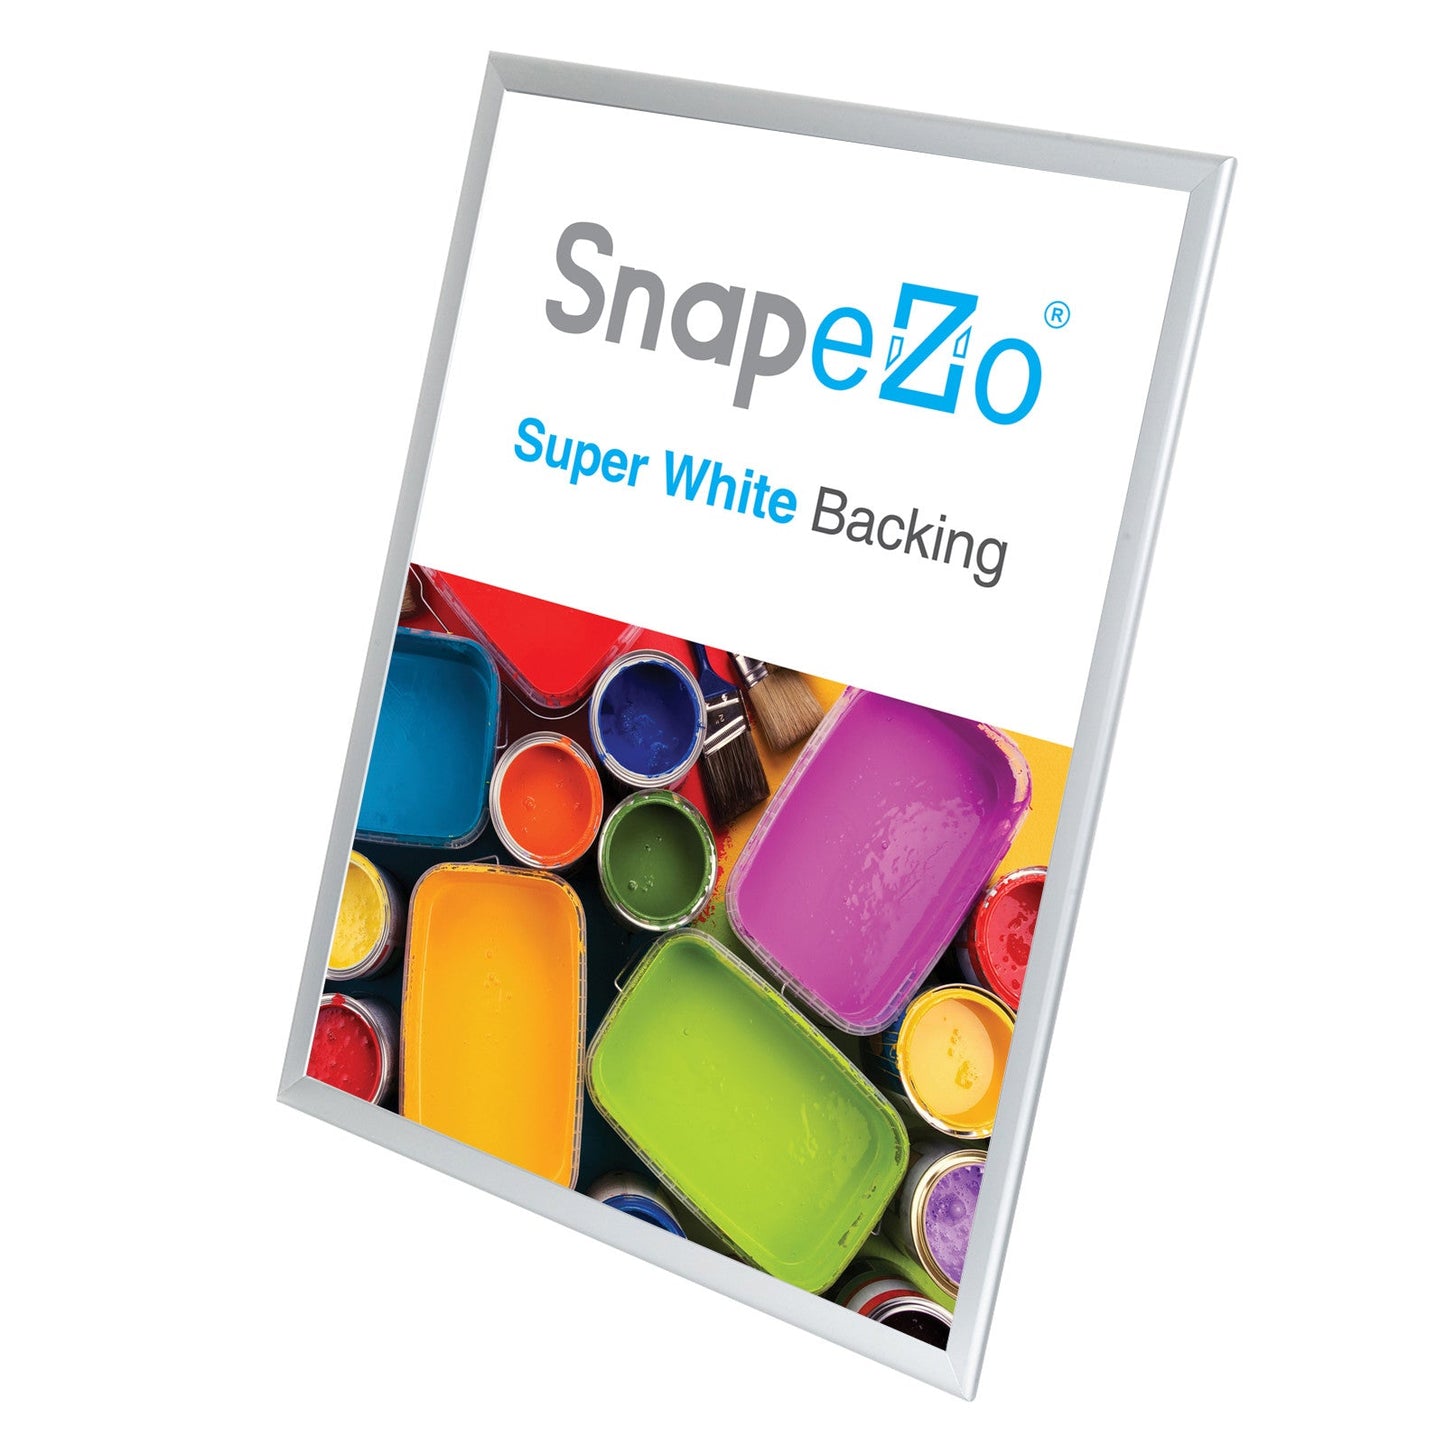 Load image into Gallery viewer, 27x39 Silver SnapeZo® Snap Frame - 1.25&amp;quot; Profile
